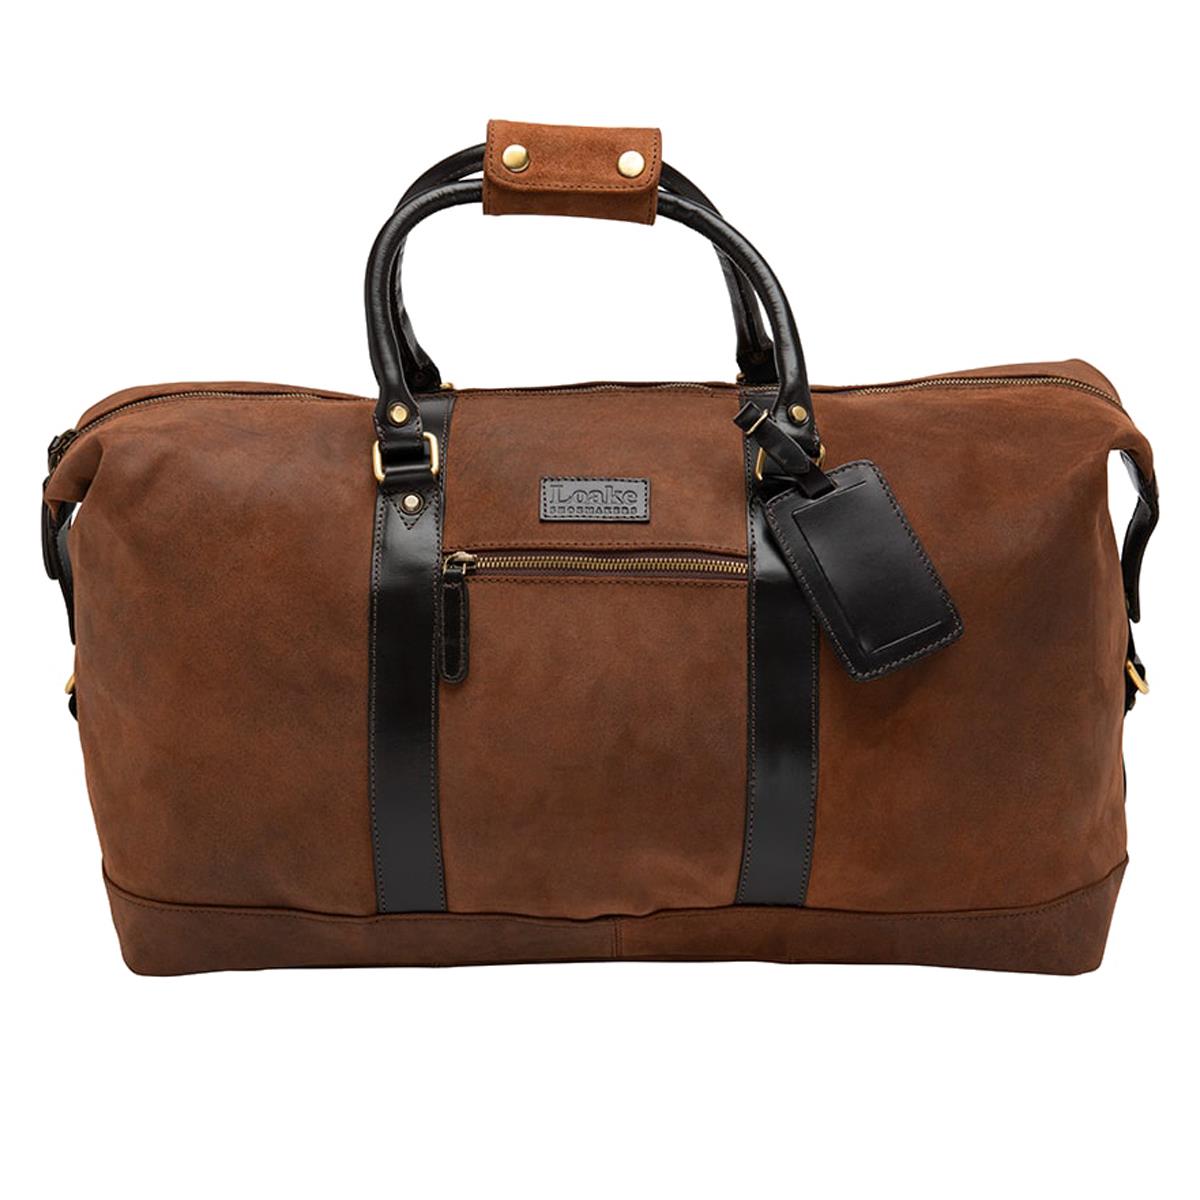 Loake Cornwall Travel Bag Questions & Answers